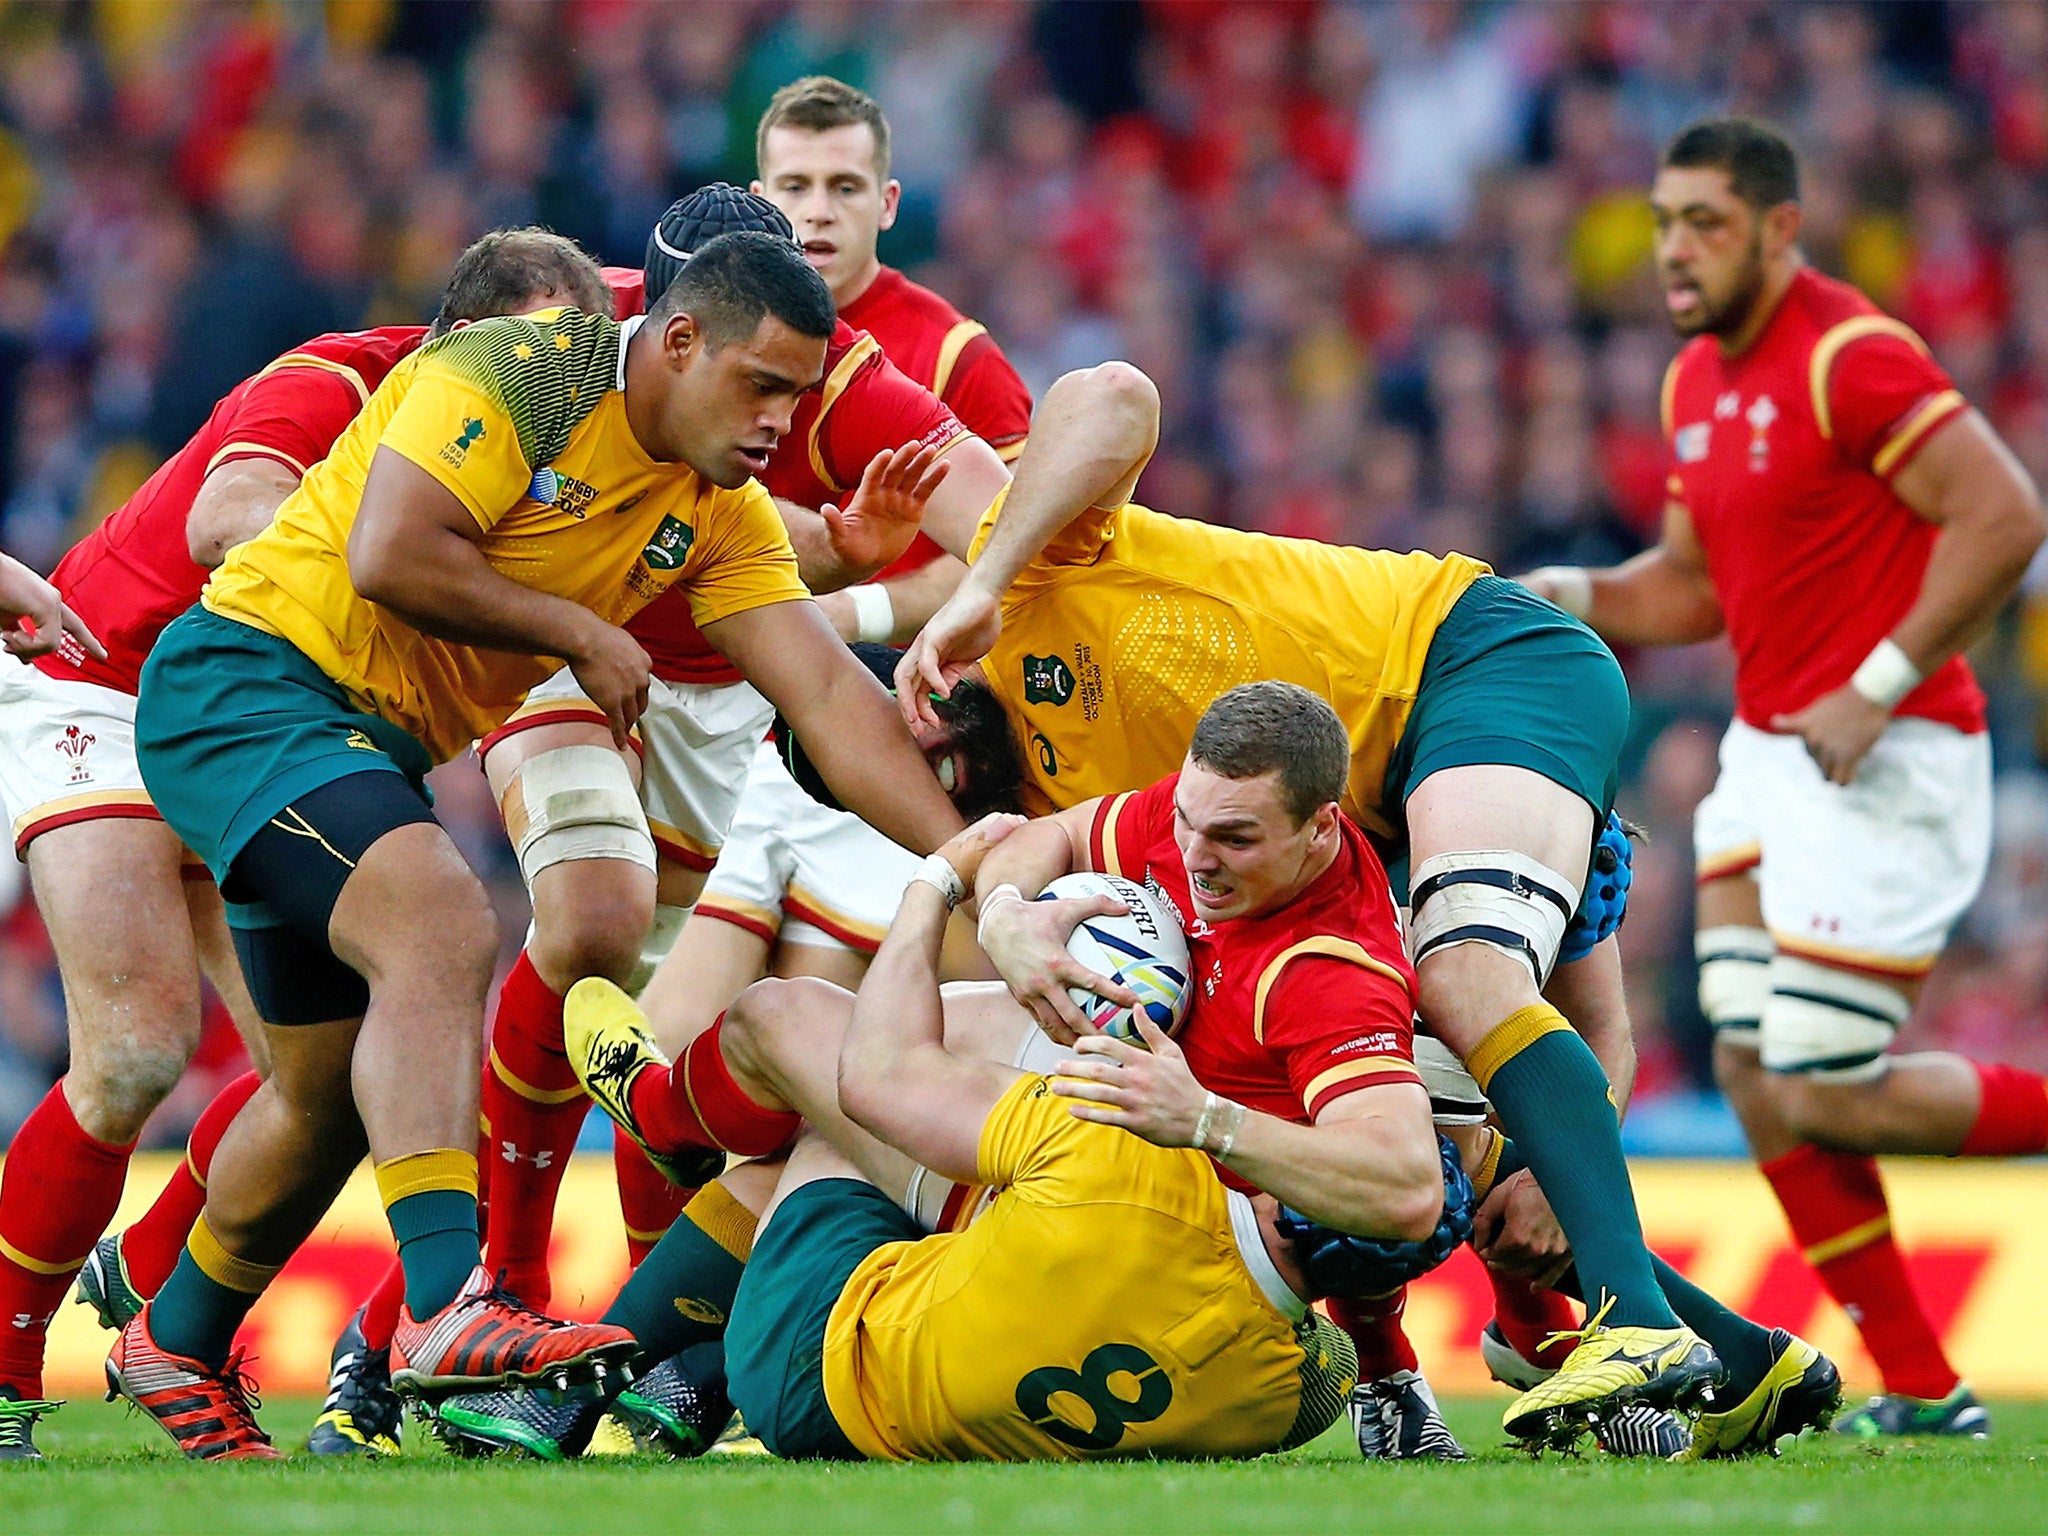 The Australian defence performed heroics against Wales at Twickenham